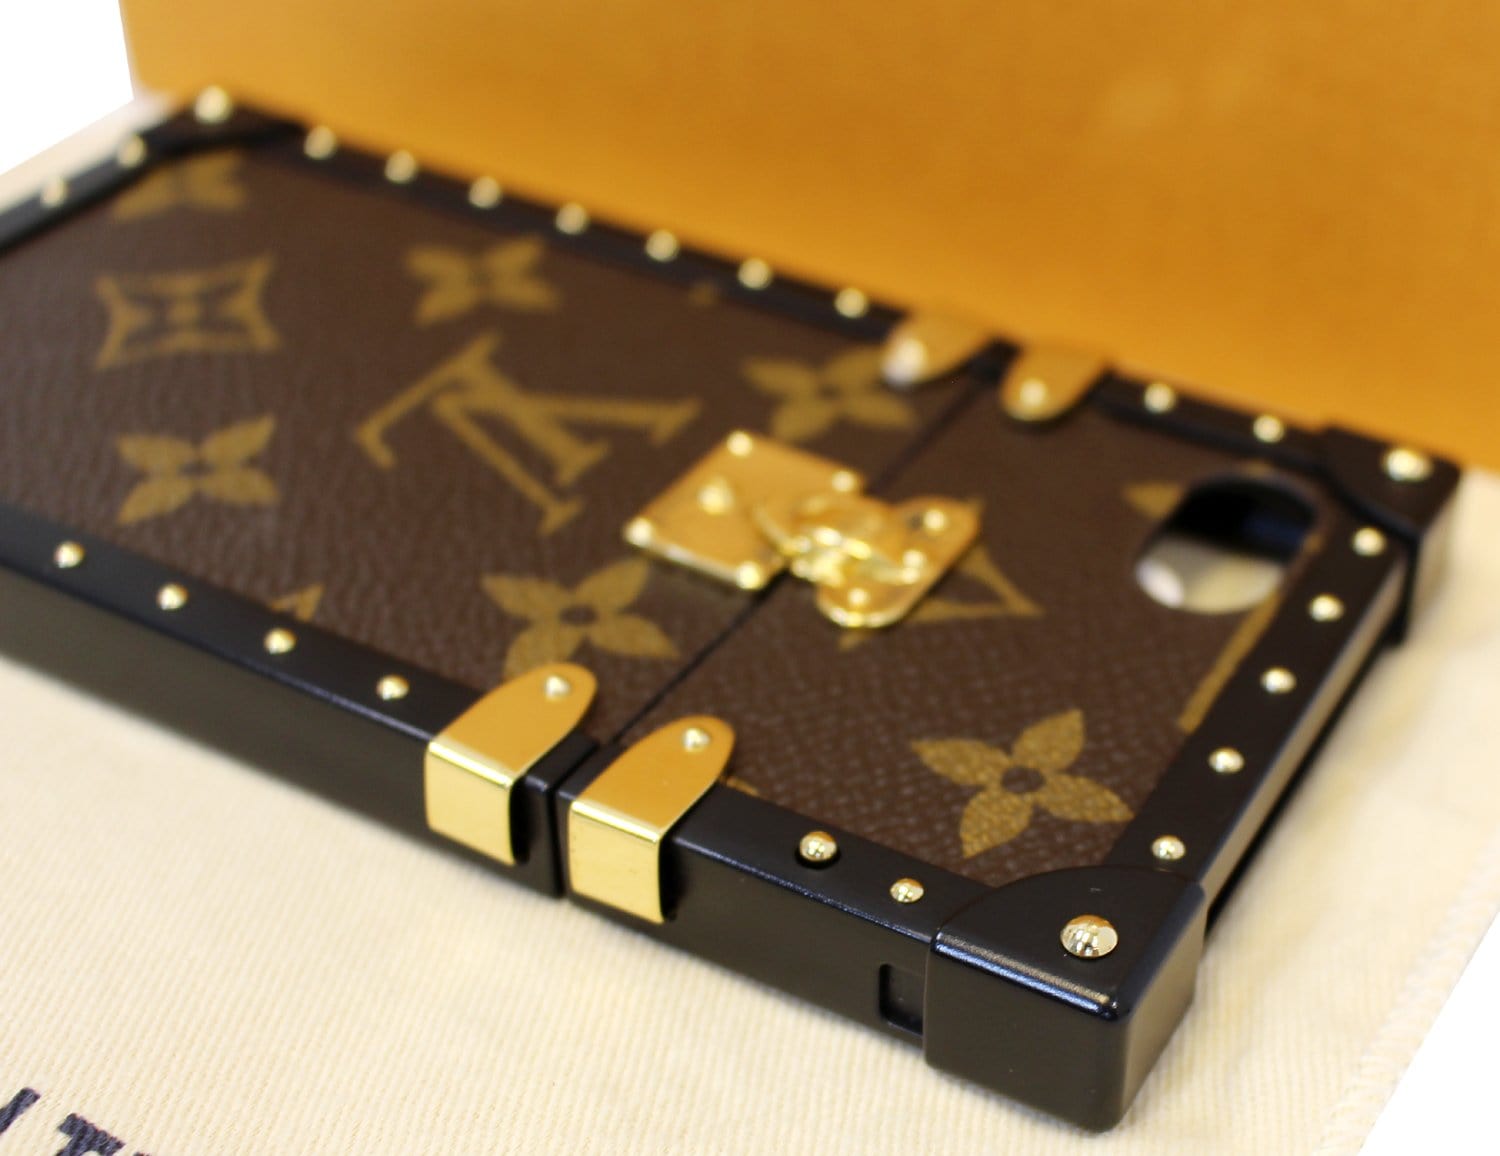 At $5,500 the highly anticipated Louis Vuitton Eye-Trunk iPhone